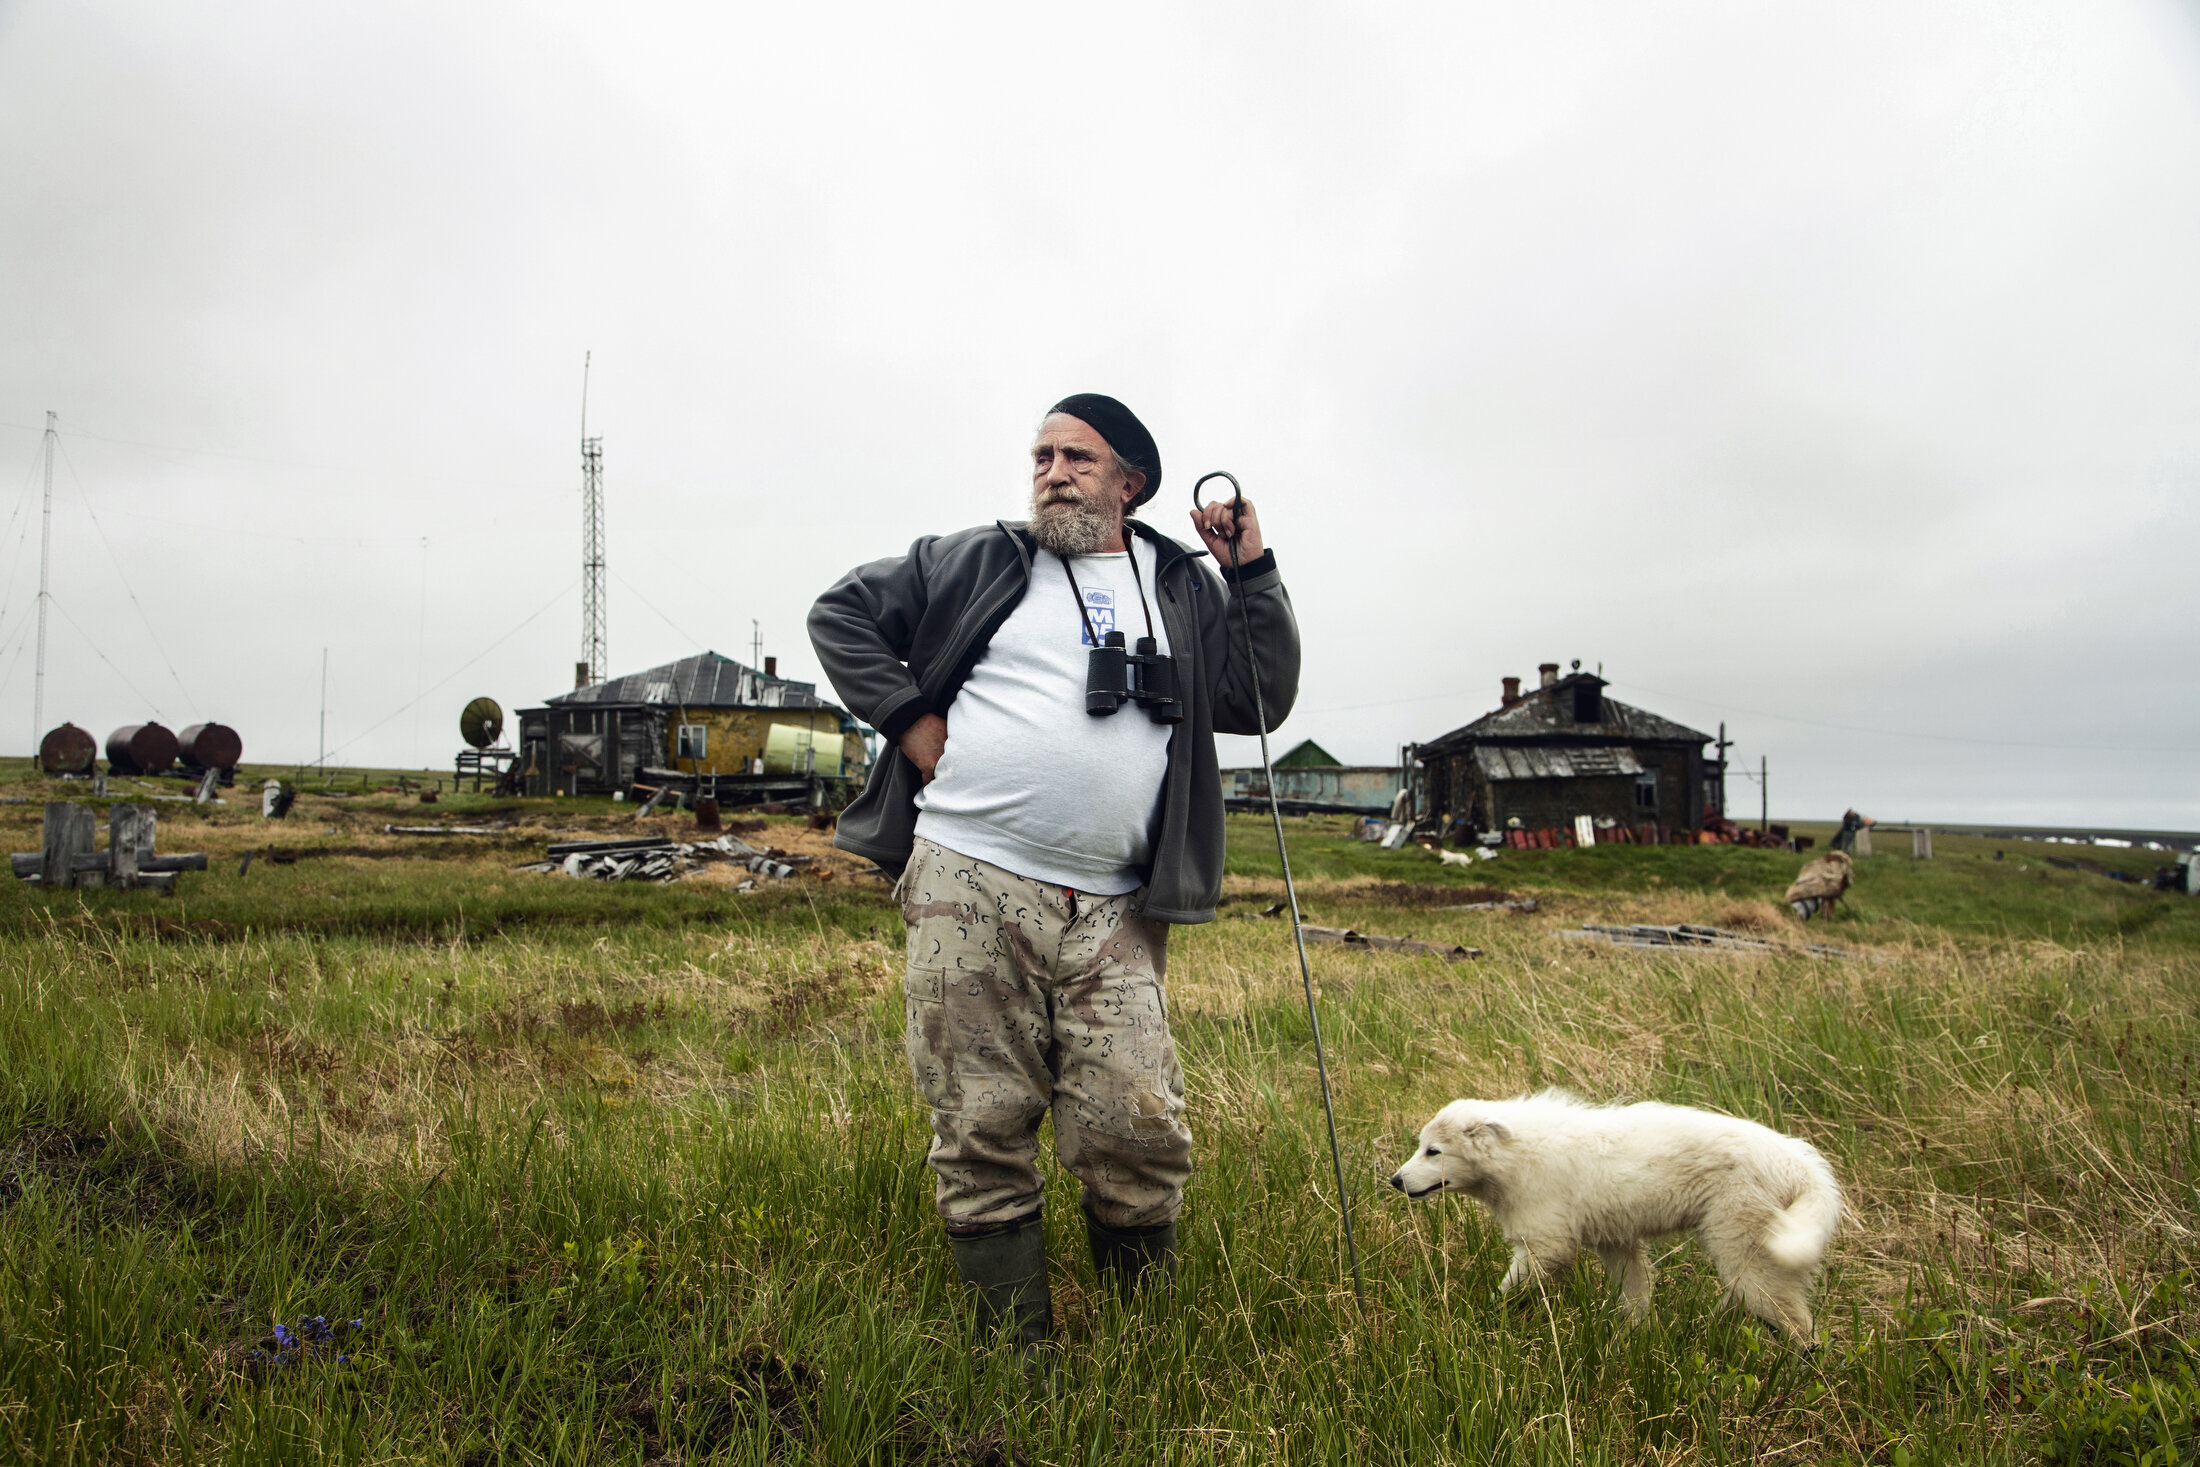  Sergey holds a tool used to measure permafrost depth on a trip to a weather and research station near Chersky, Siberia with Sergey Zimov located where the Kolyma river meets the Arctic Ocean. Sergey founded the neighboring Northeast Science Station,